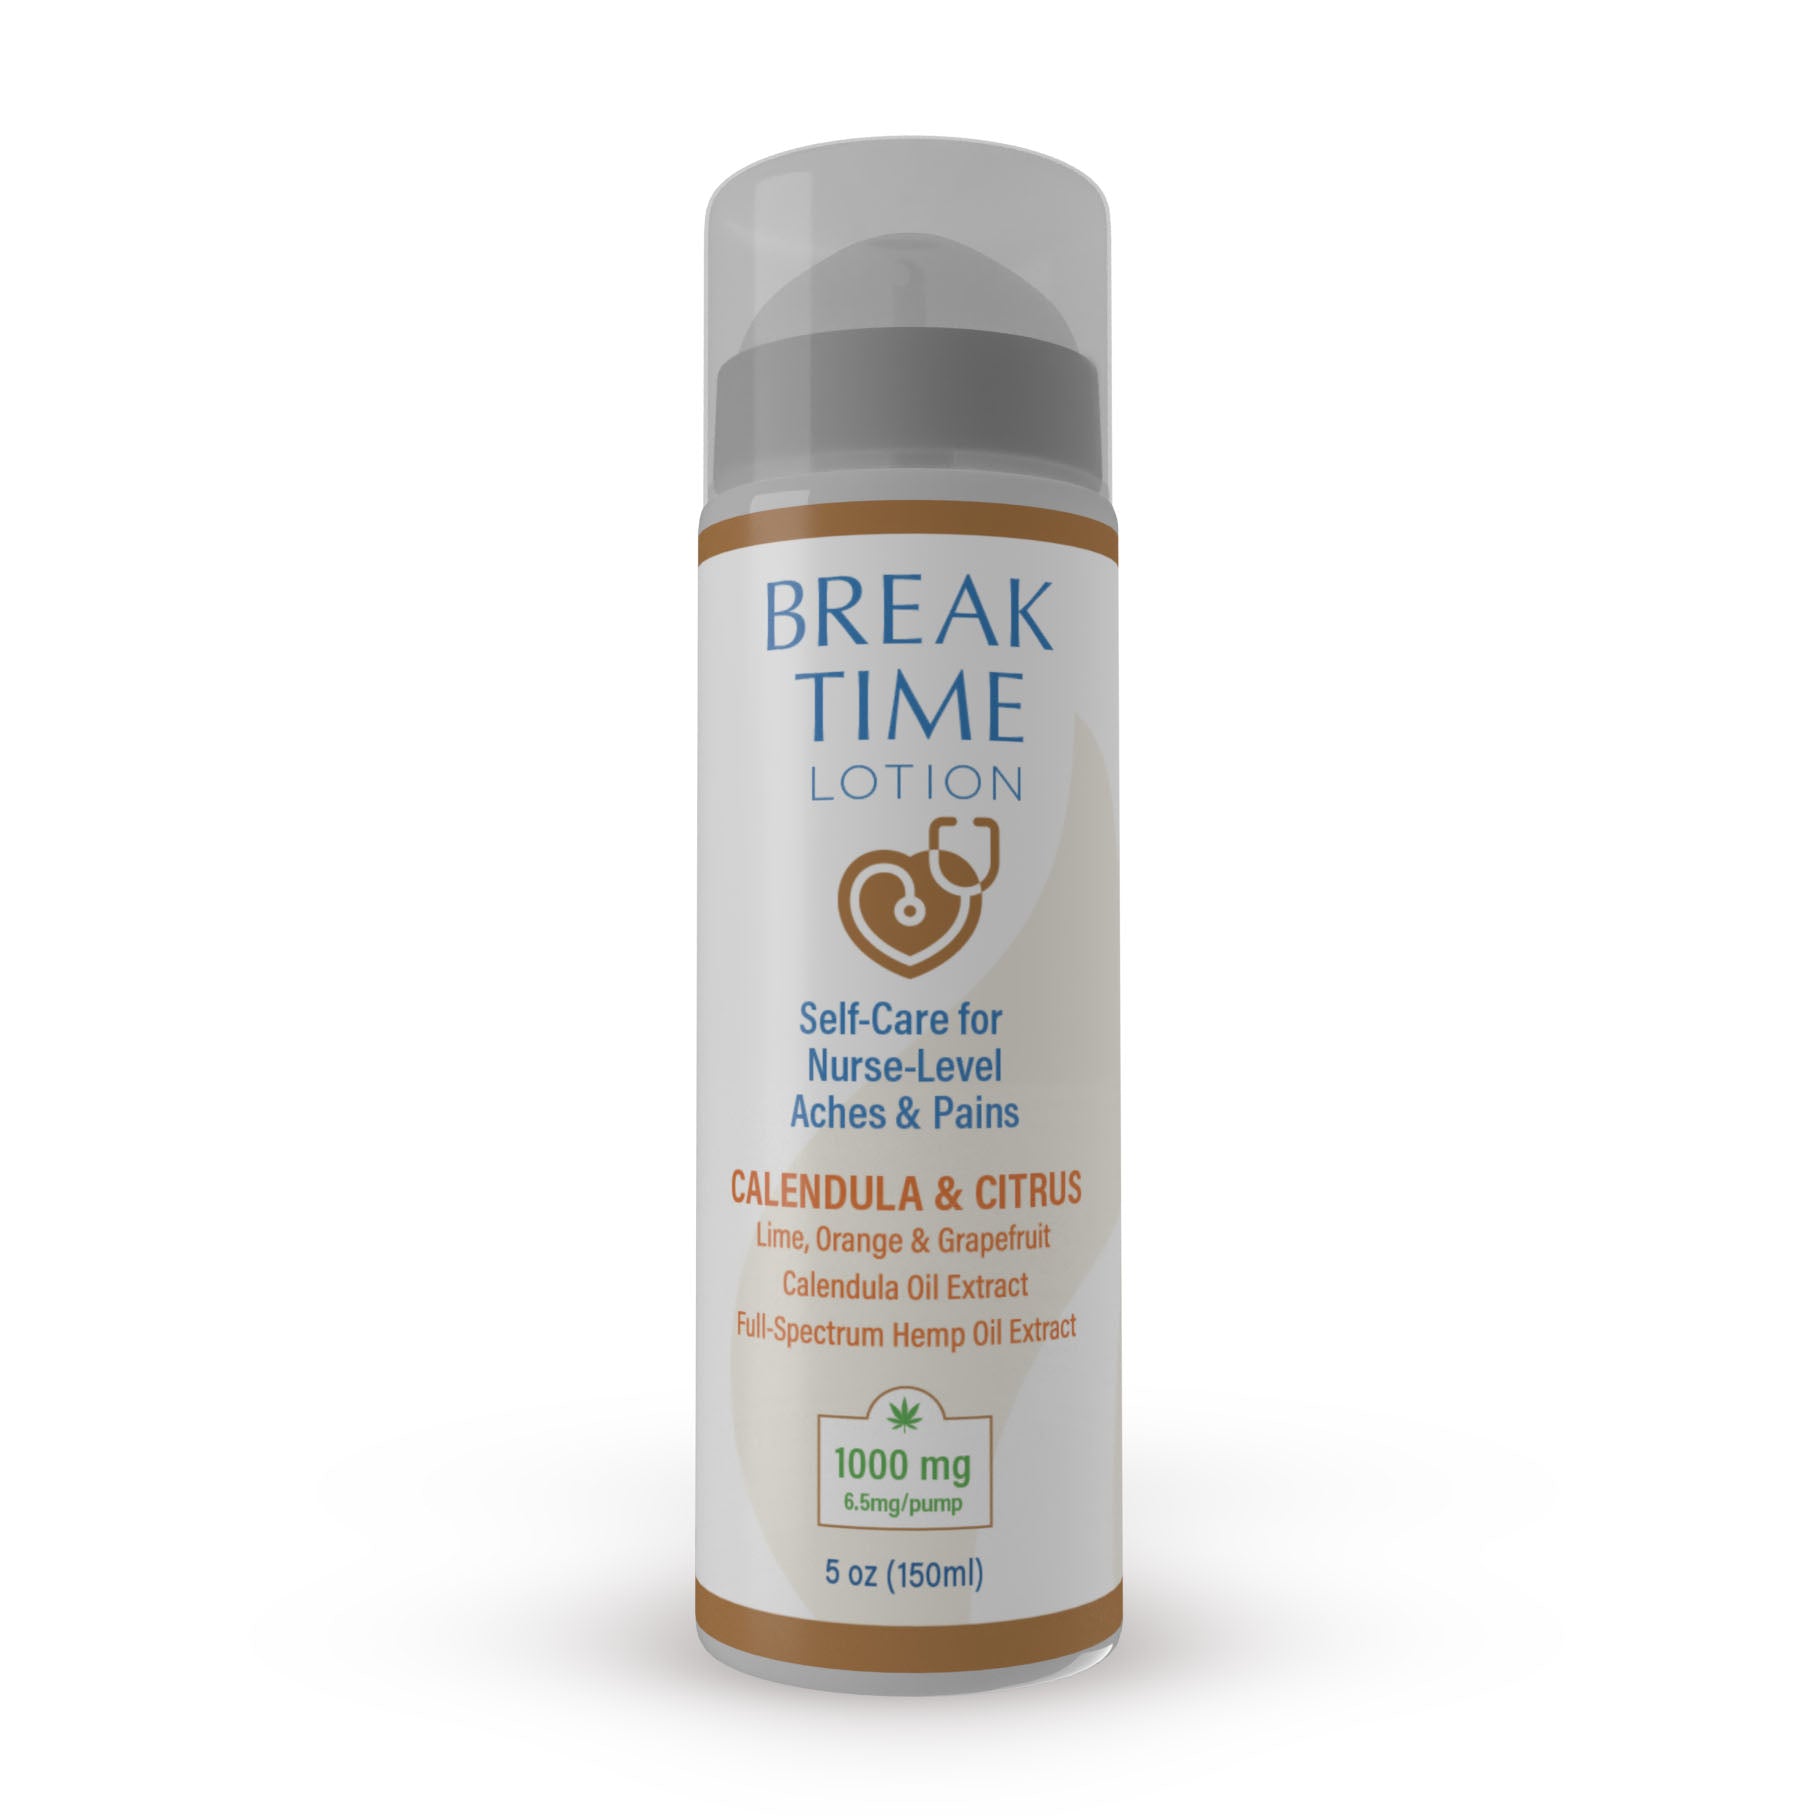 BREAKTIME Lotion from Rekindled Nurse-You spend your life caring for people.
Around the clock, from loved ones to patients, you give 110% of yourself to provide comfort and healing to others.
When you’re-Cedar Meadow Farm